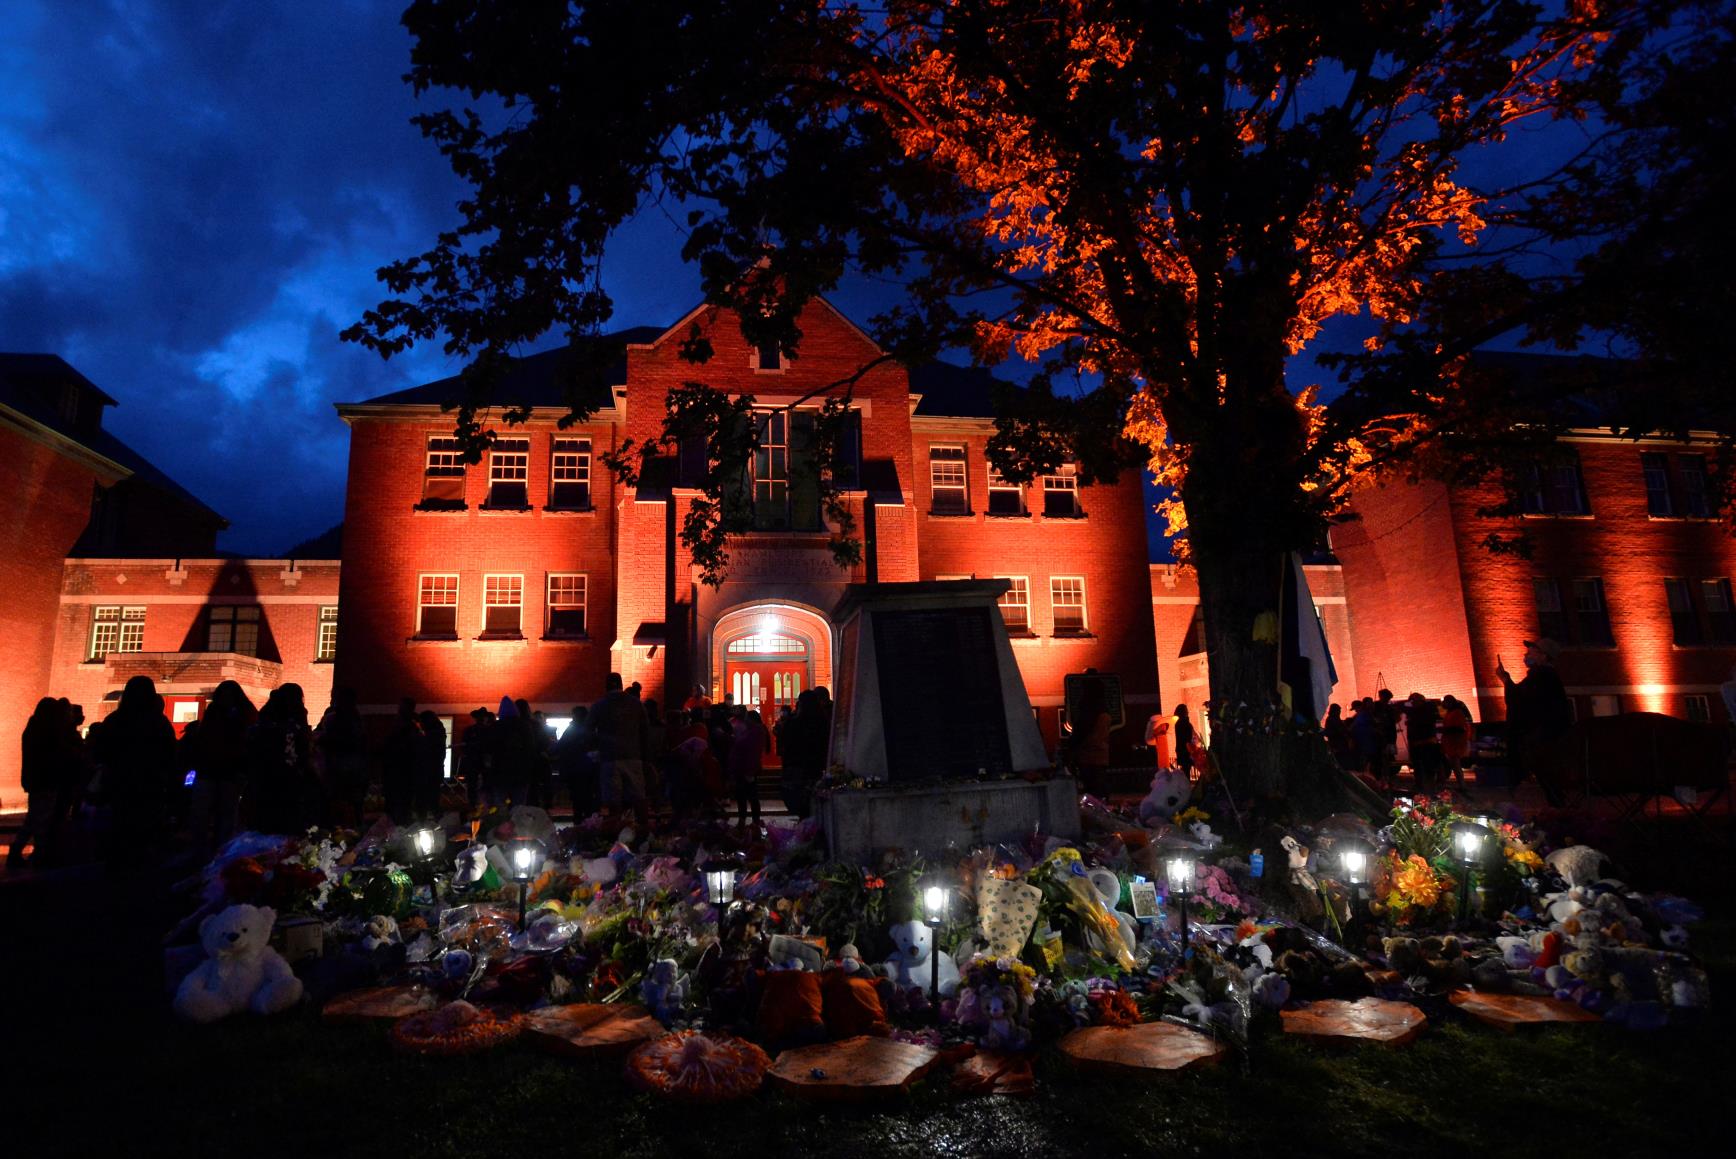 A makeshift memorial grows on the grounds of the former Kamloops Indian Residential School after the remains of 215 children, some as young as three years old, were found at the site in Kamloops, British Columbia, Canada June 5, 2021.  REUTERS/Jennifer Gauthier